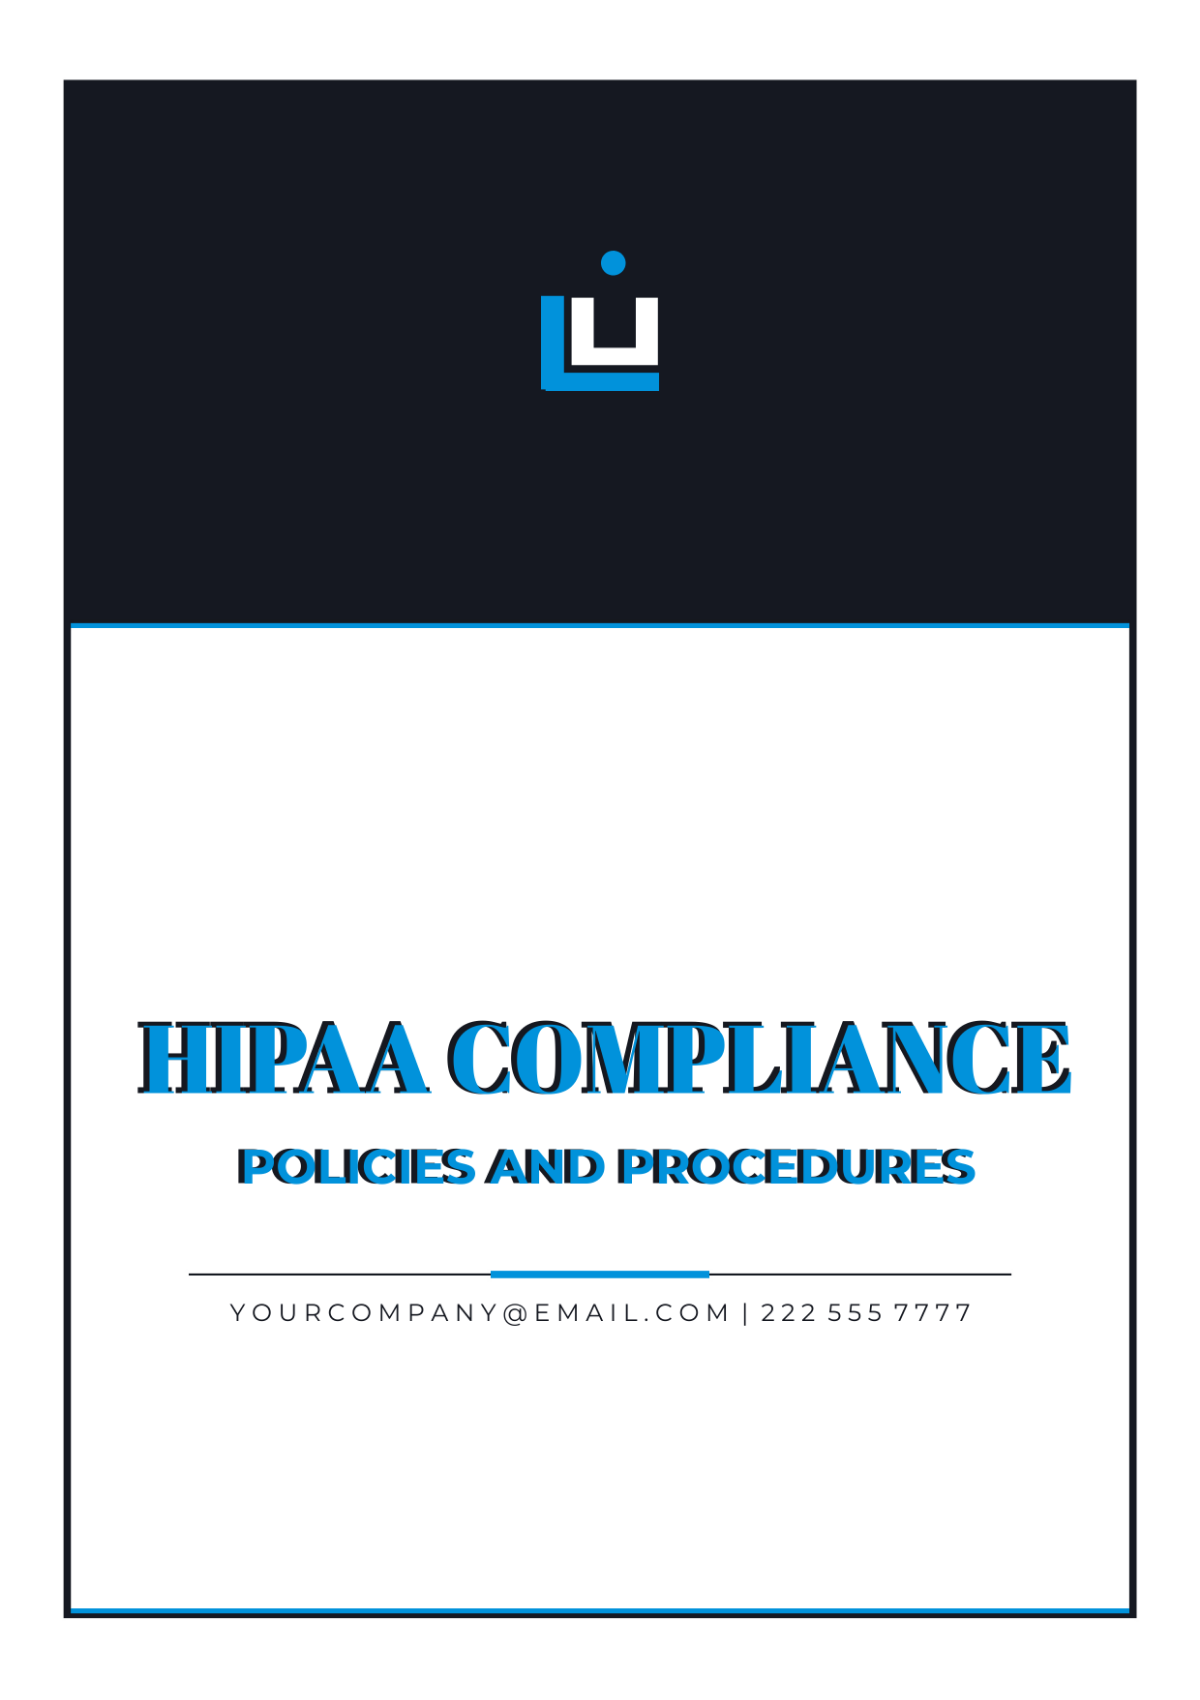 HIPAA Compliance Policies And Procedures Template